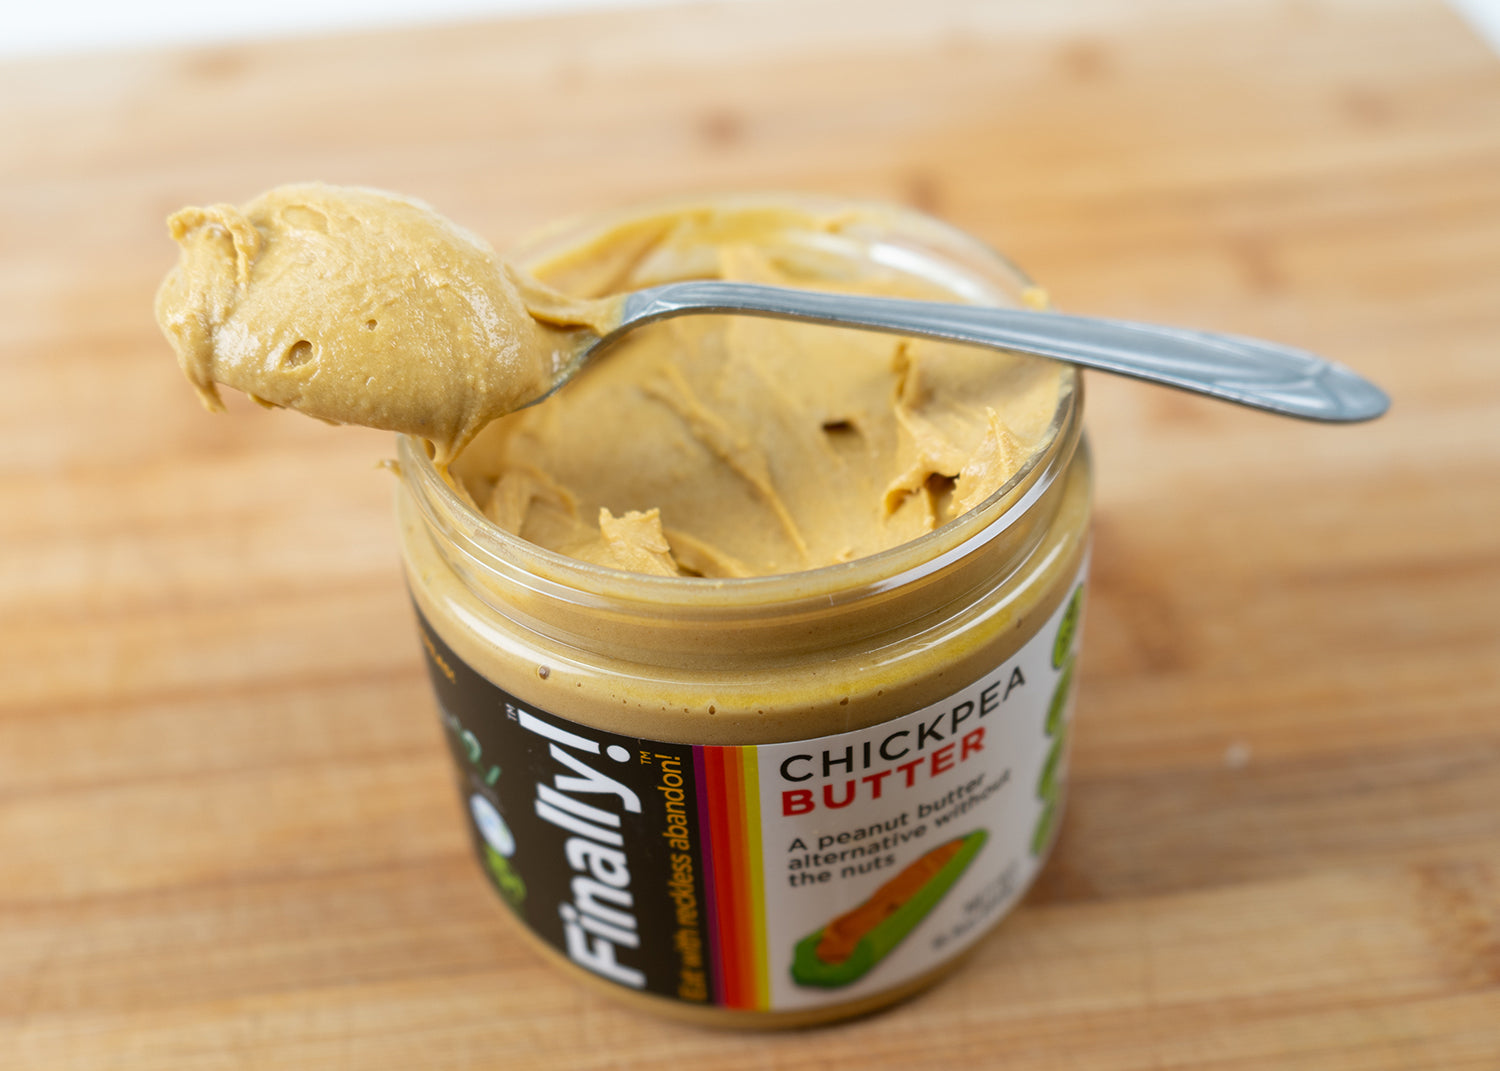 Classic Chickpea Butter